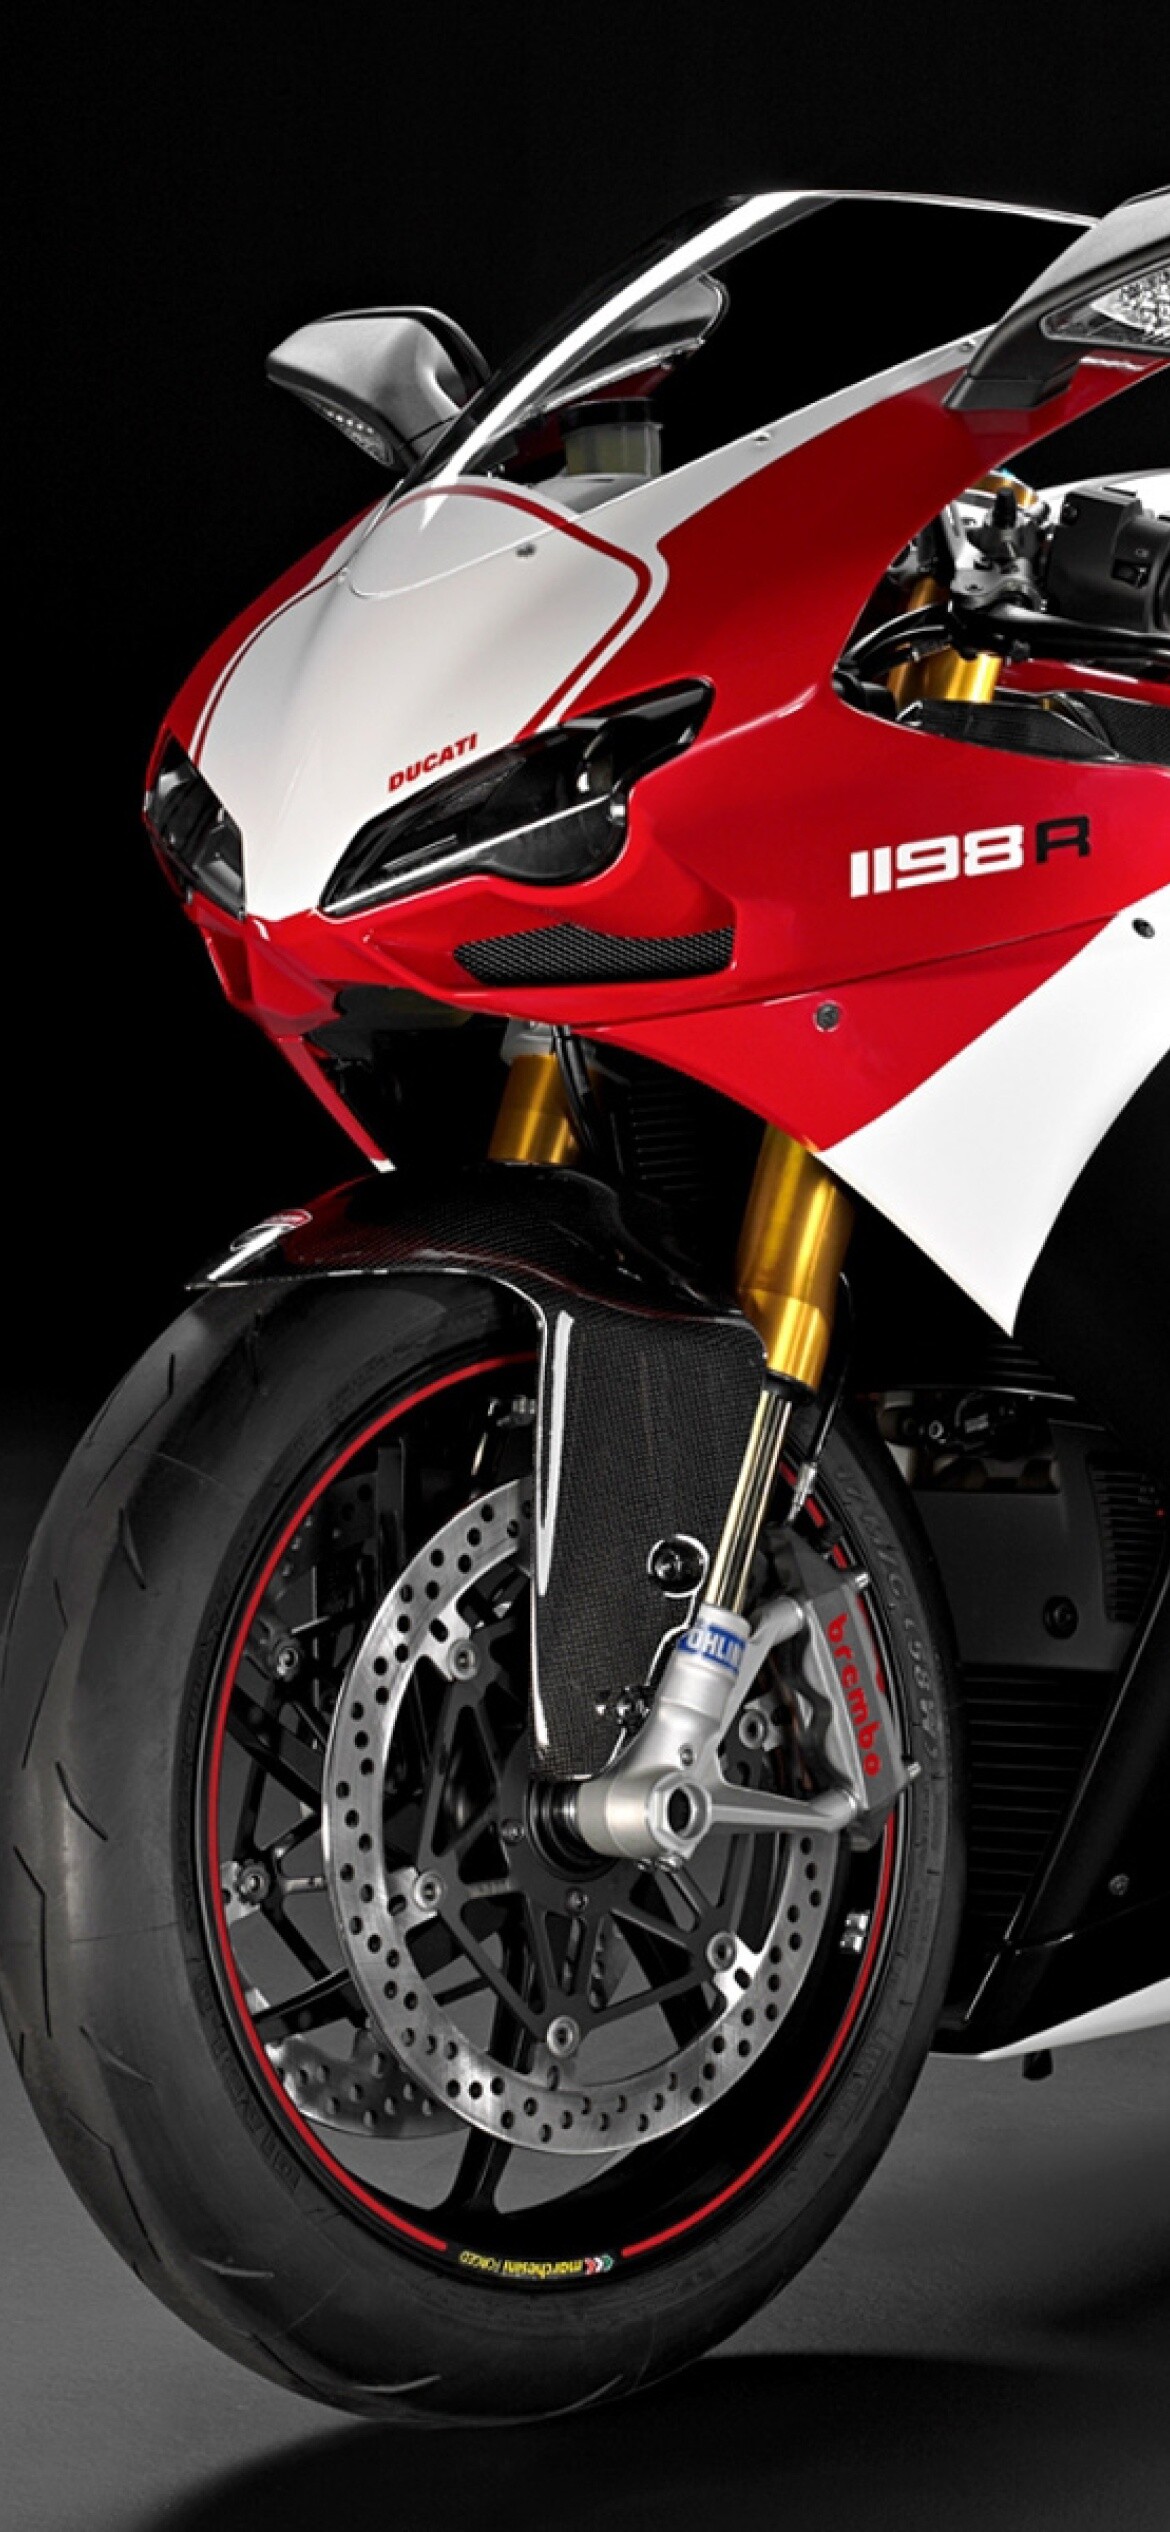 Ducati: Superbike, 1198 R model, A sport bike made by from 2009 to 2011. 1170x2540 HD Wallpaper.